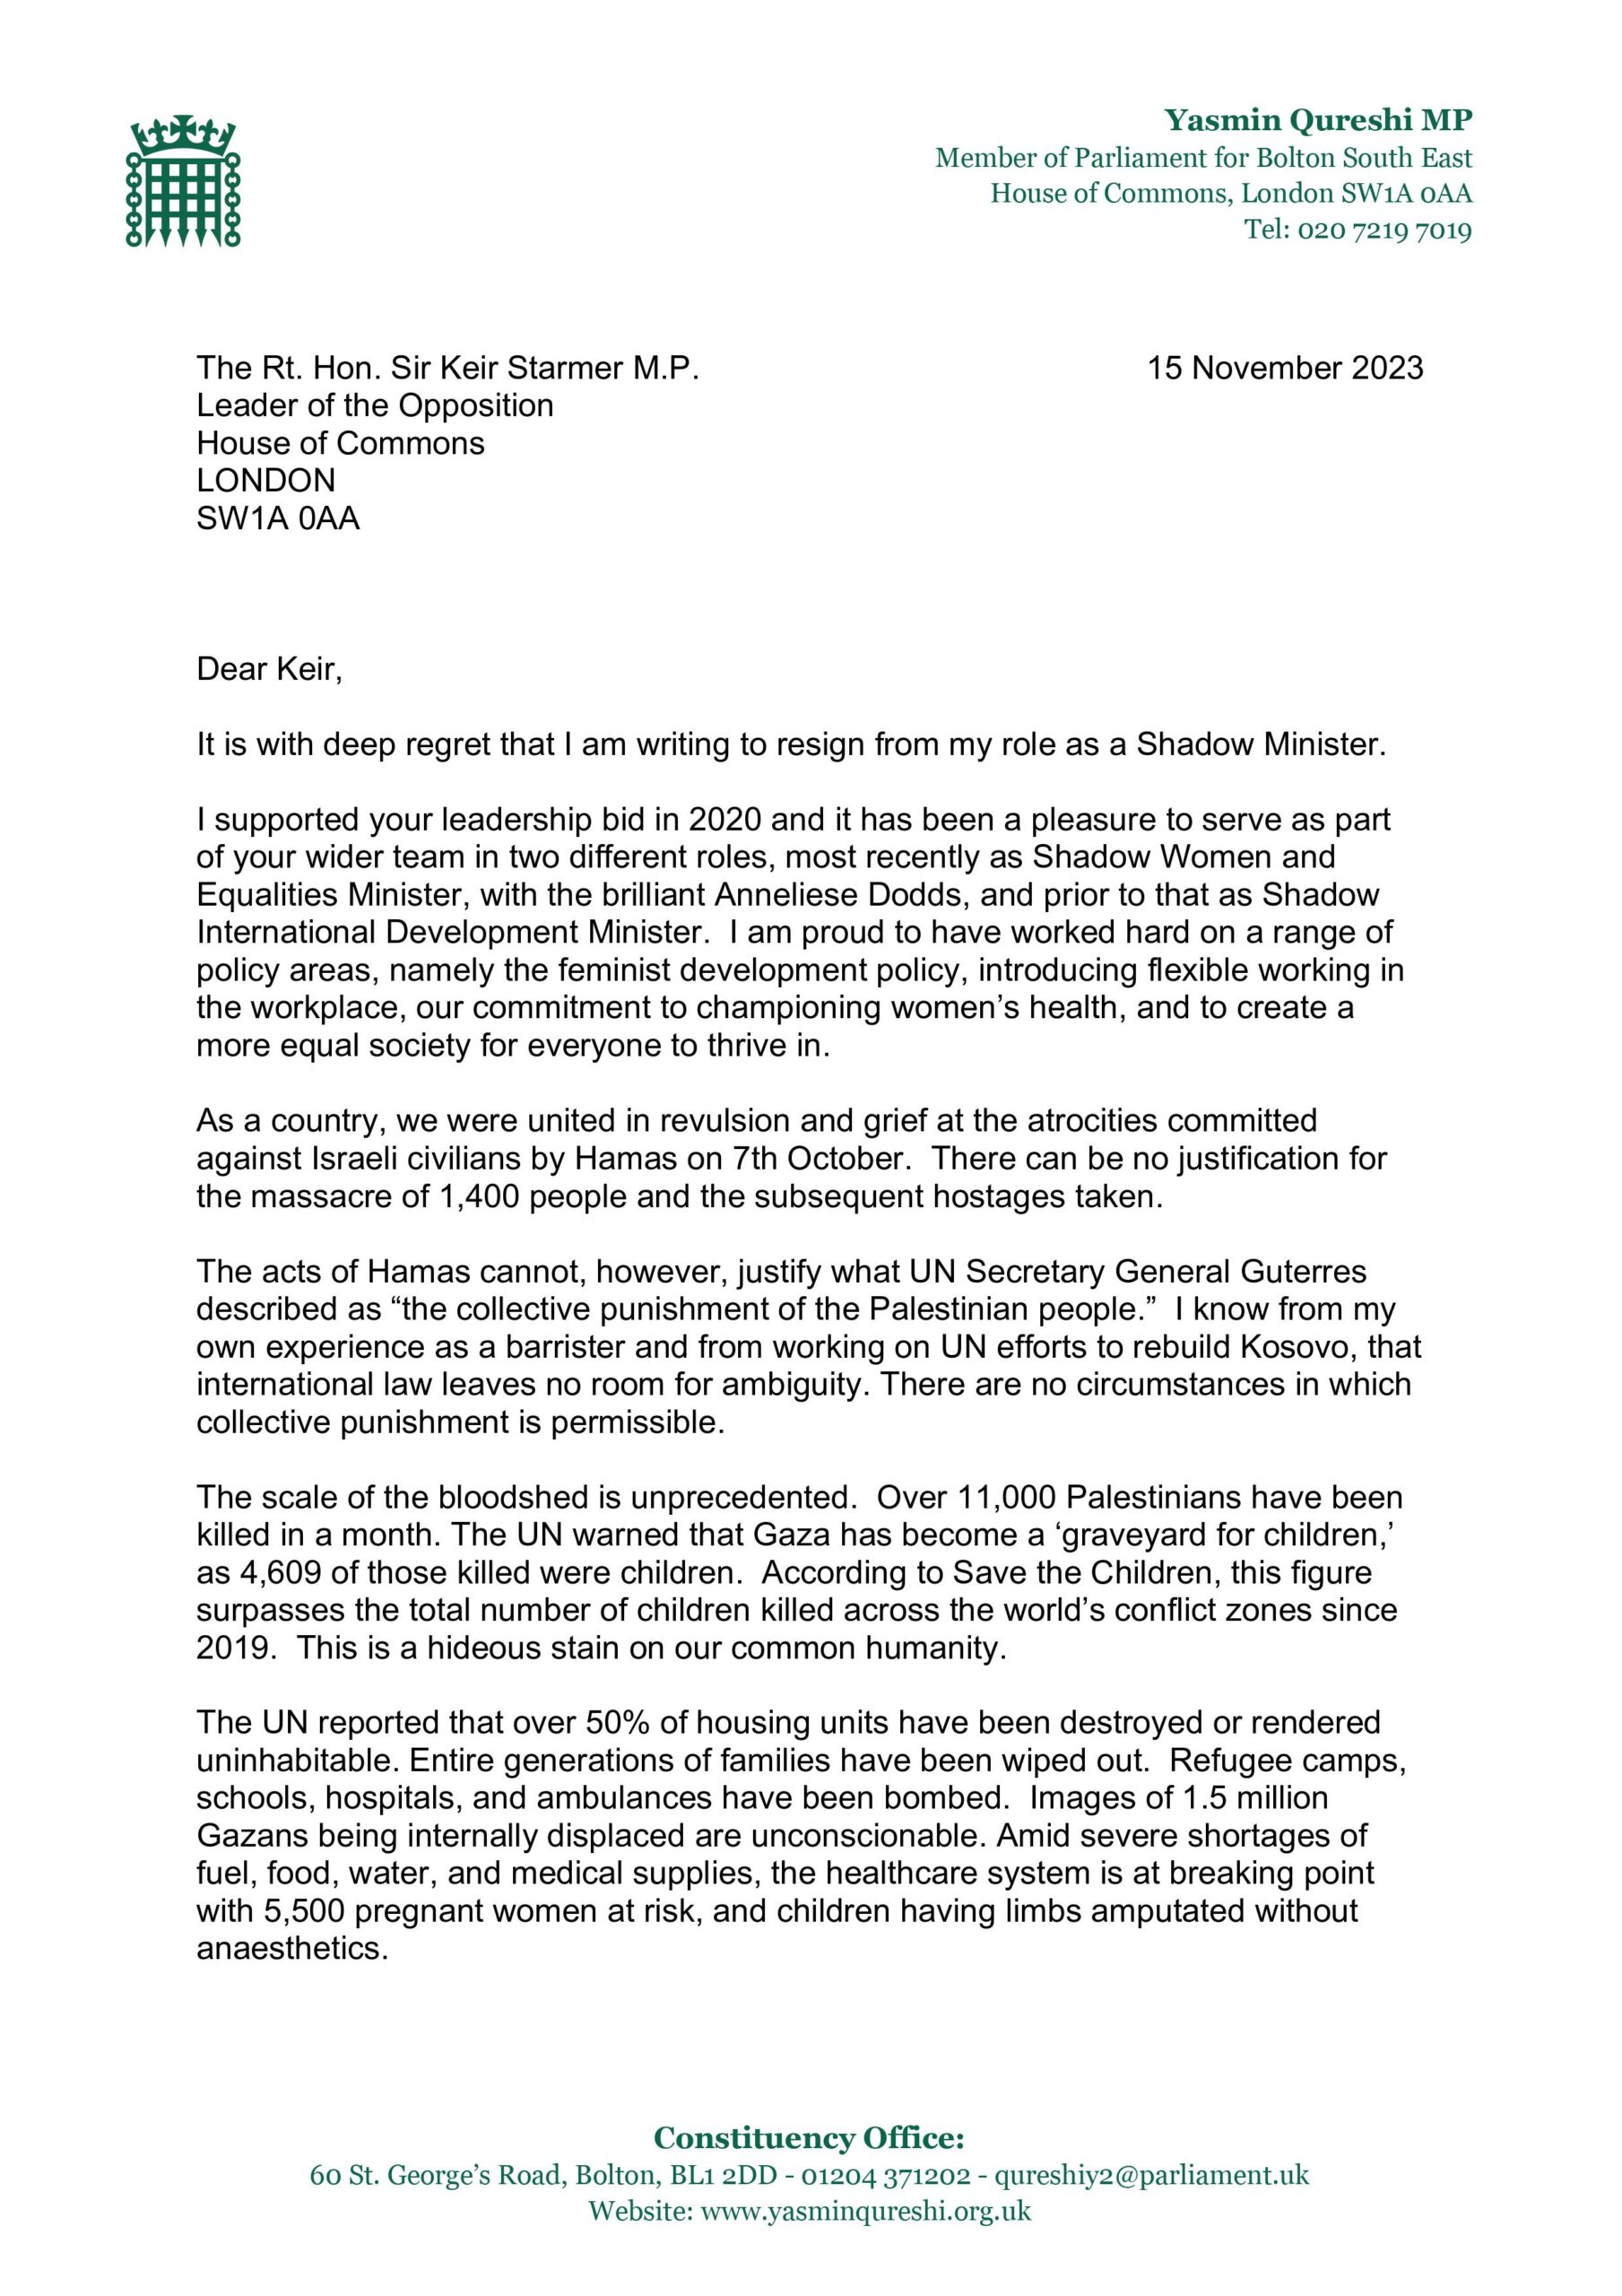 Images shows the first page of my resignation letter to Sir Keir Starmer